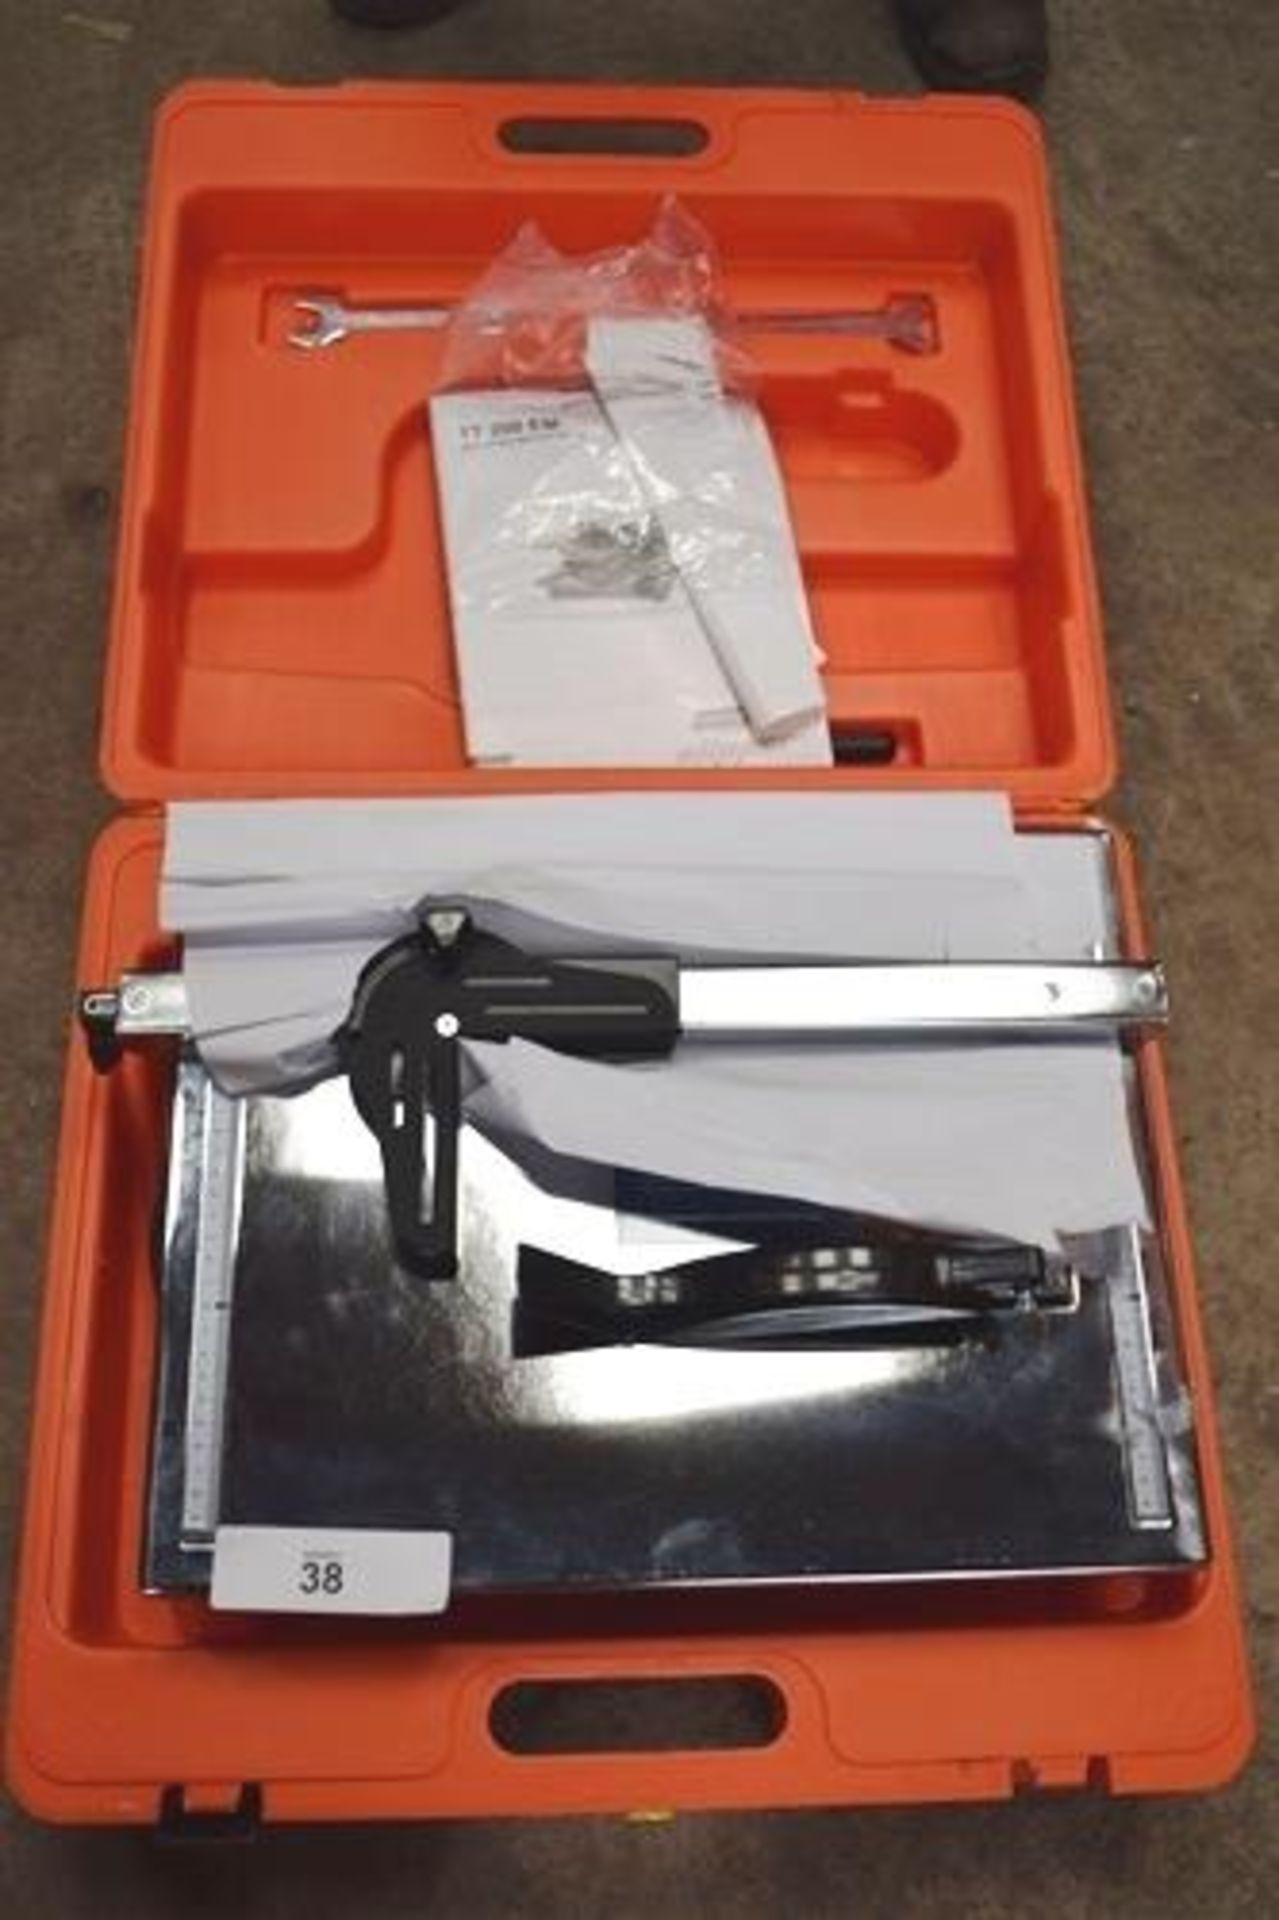 1 x Clipper tile cutter, model TT200EM, 240V, with manual and original case, one clasp missing - New